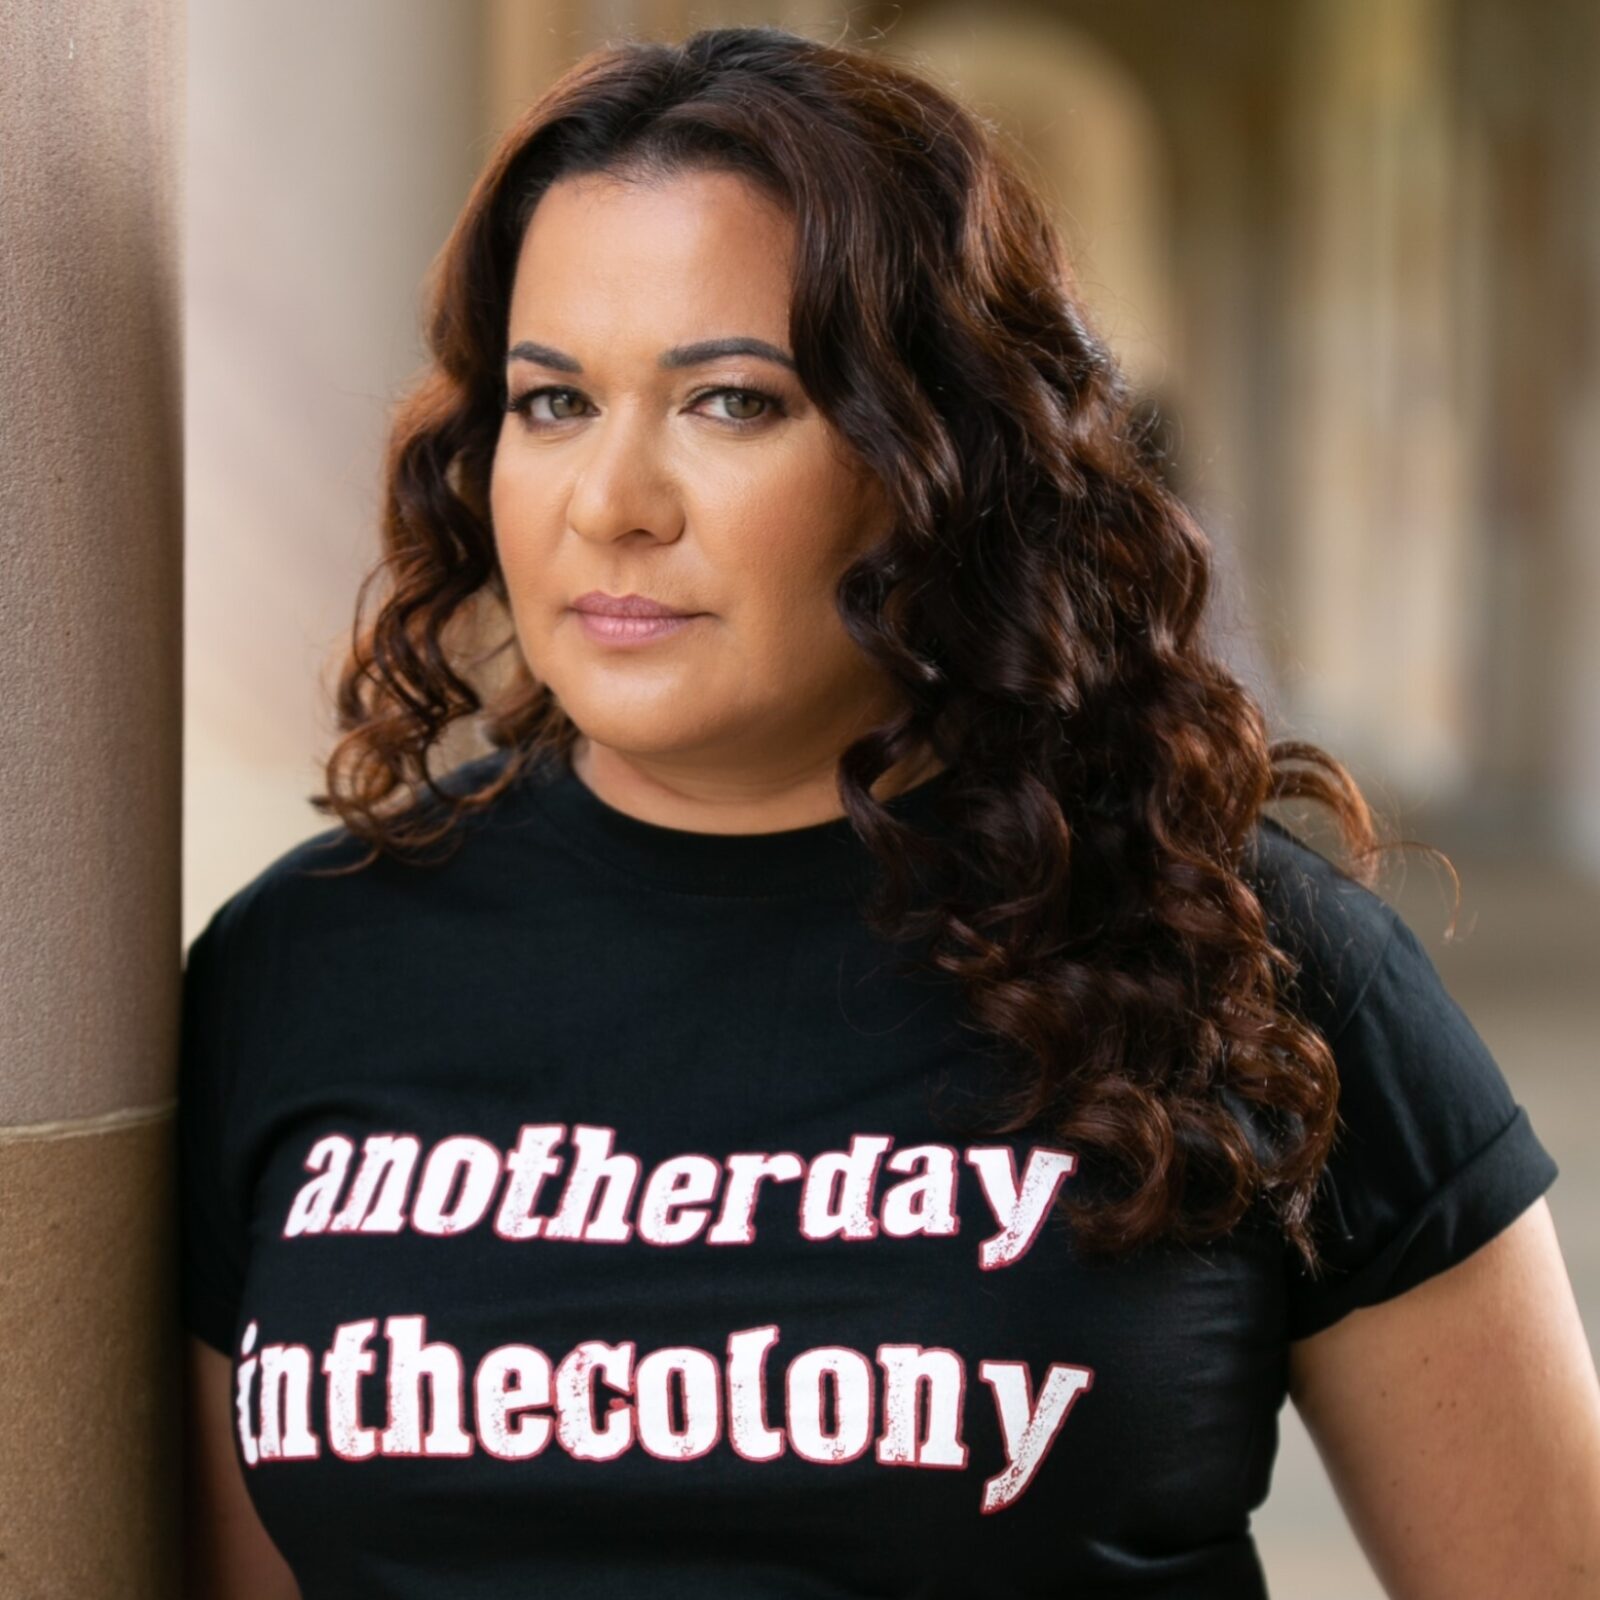 A photograph of Chelsea Watego standing beside a sandstone pillar in an open walkway. She wears a black t-shirt printed with the words 'another day in the colony' printed on it in white lettering with red borders, and she is looking at the camera with a serious expression. Chelsea's hair is dark brown and curly, and is worn down, falling across her left shoulder.